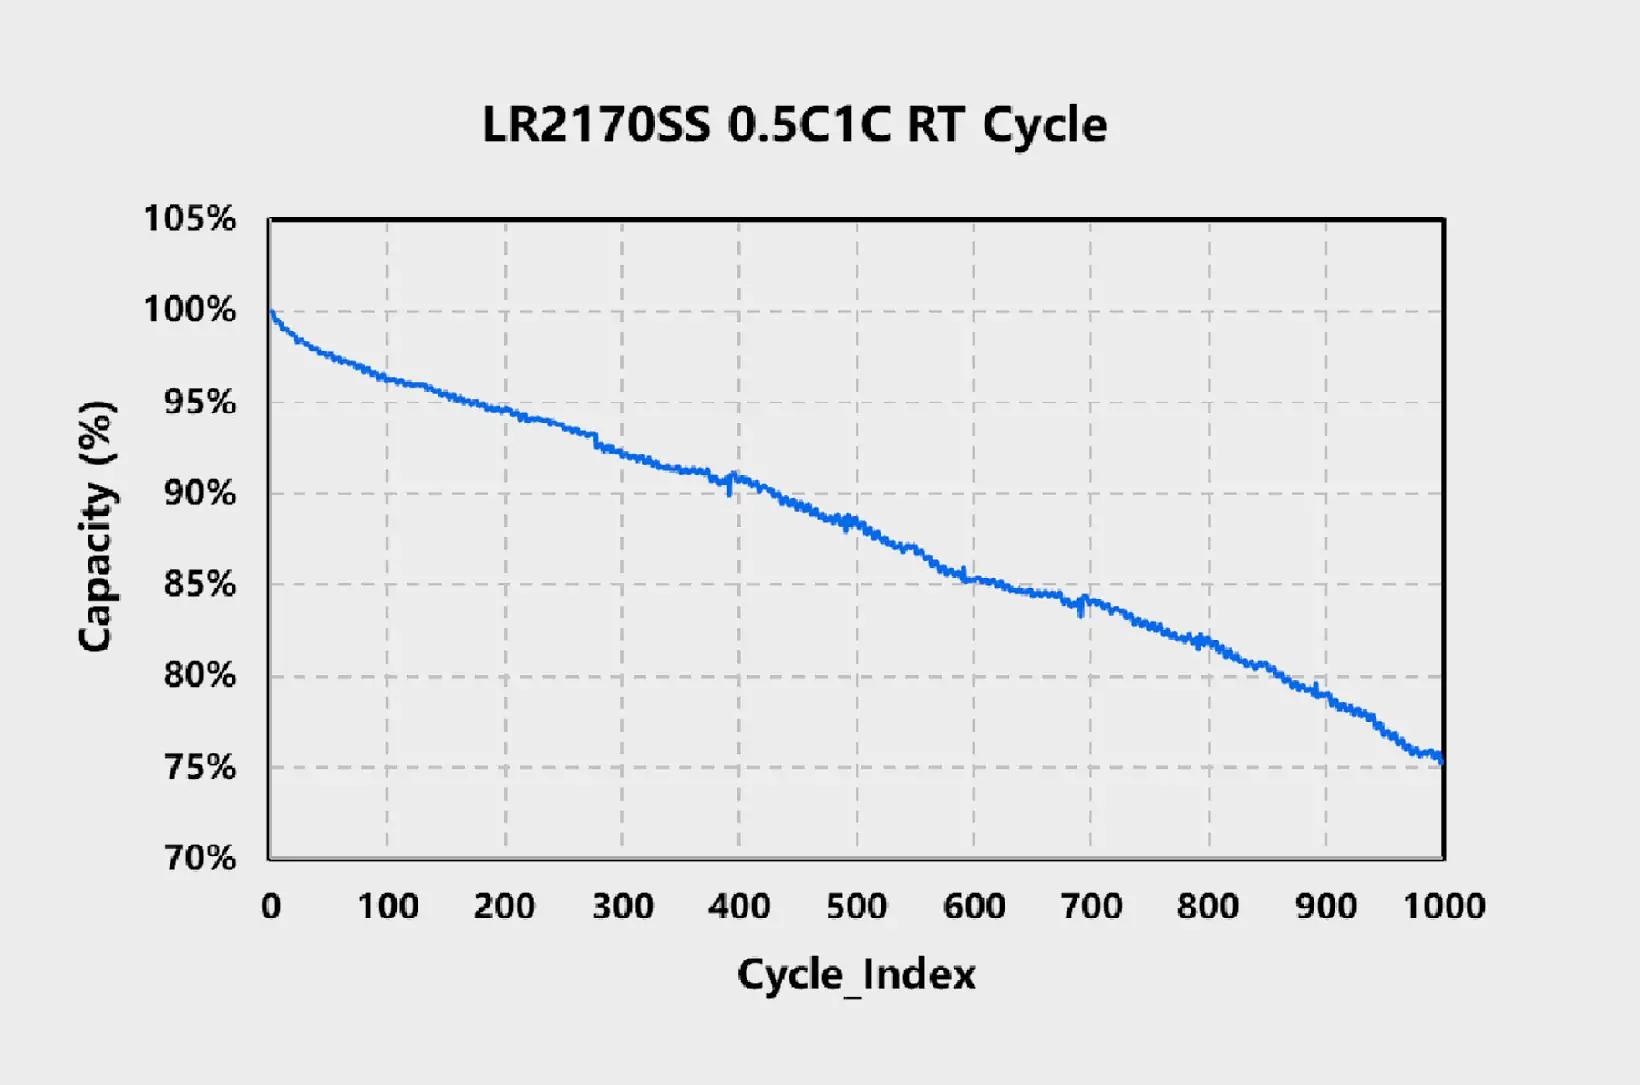 lr2170ss 05C1C RT cycle curve